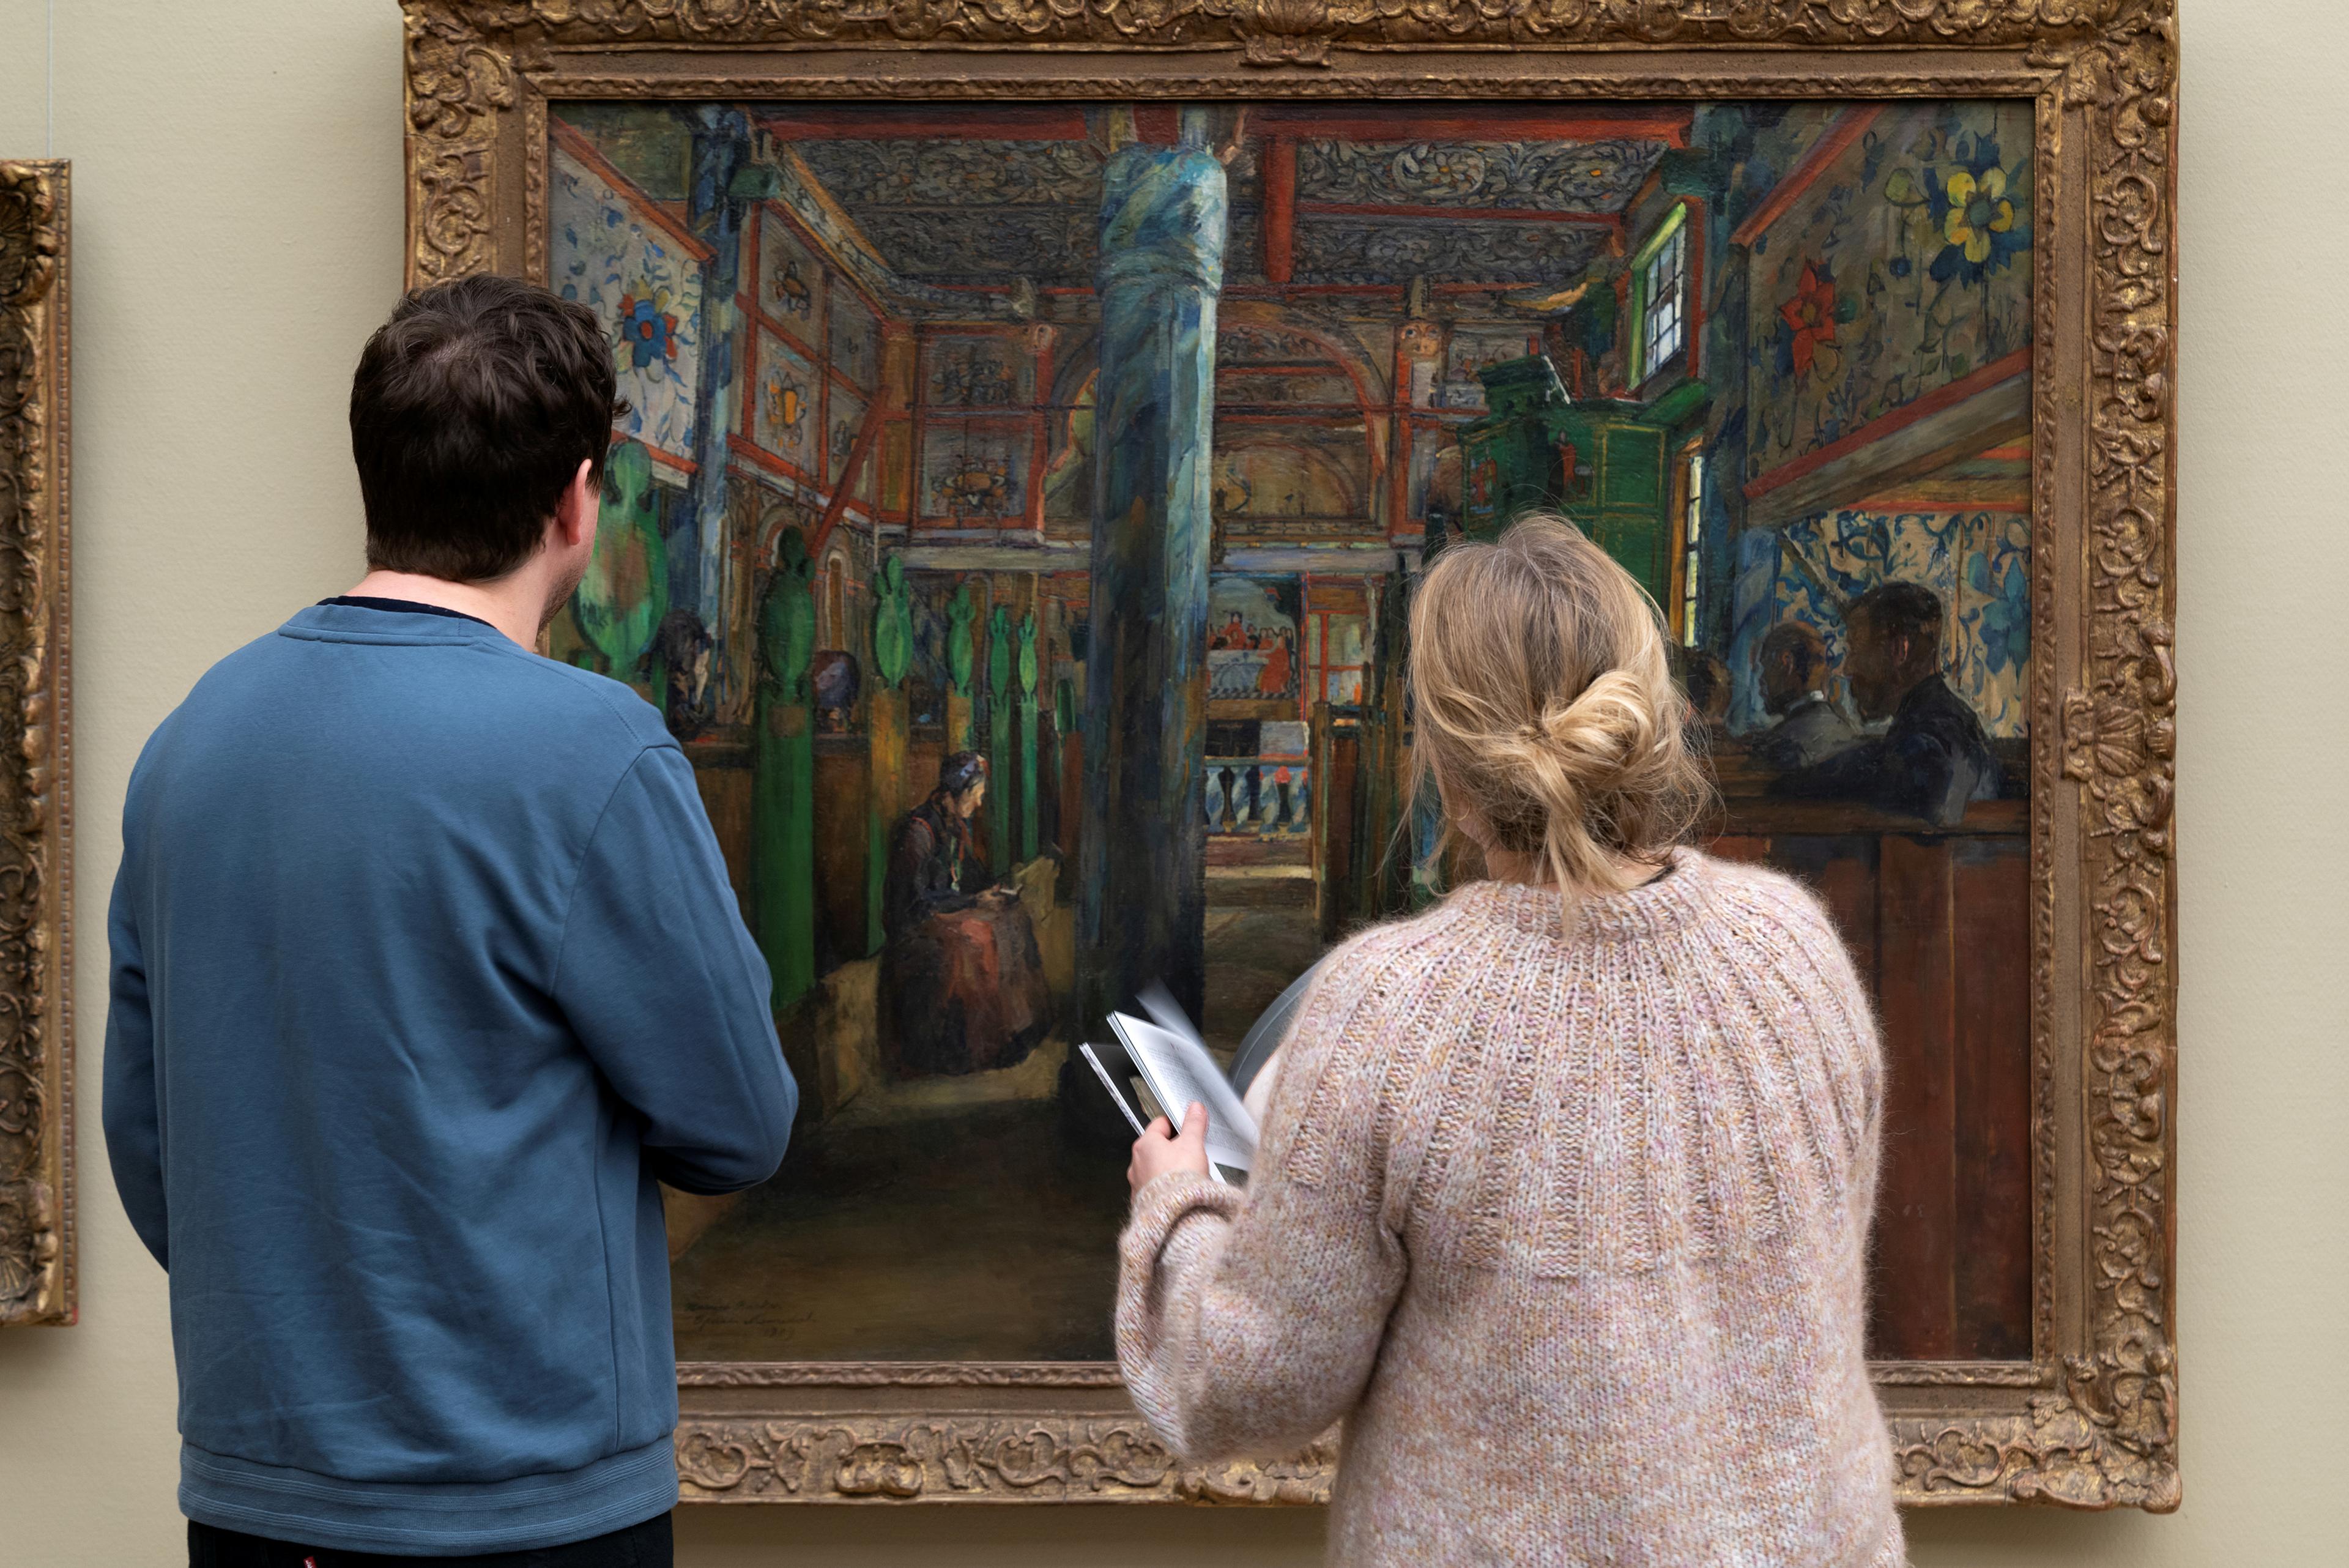 Two people are standing in front of a painting by Harriet Backer.